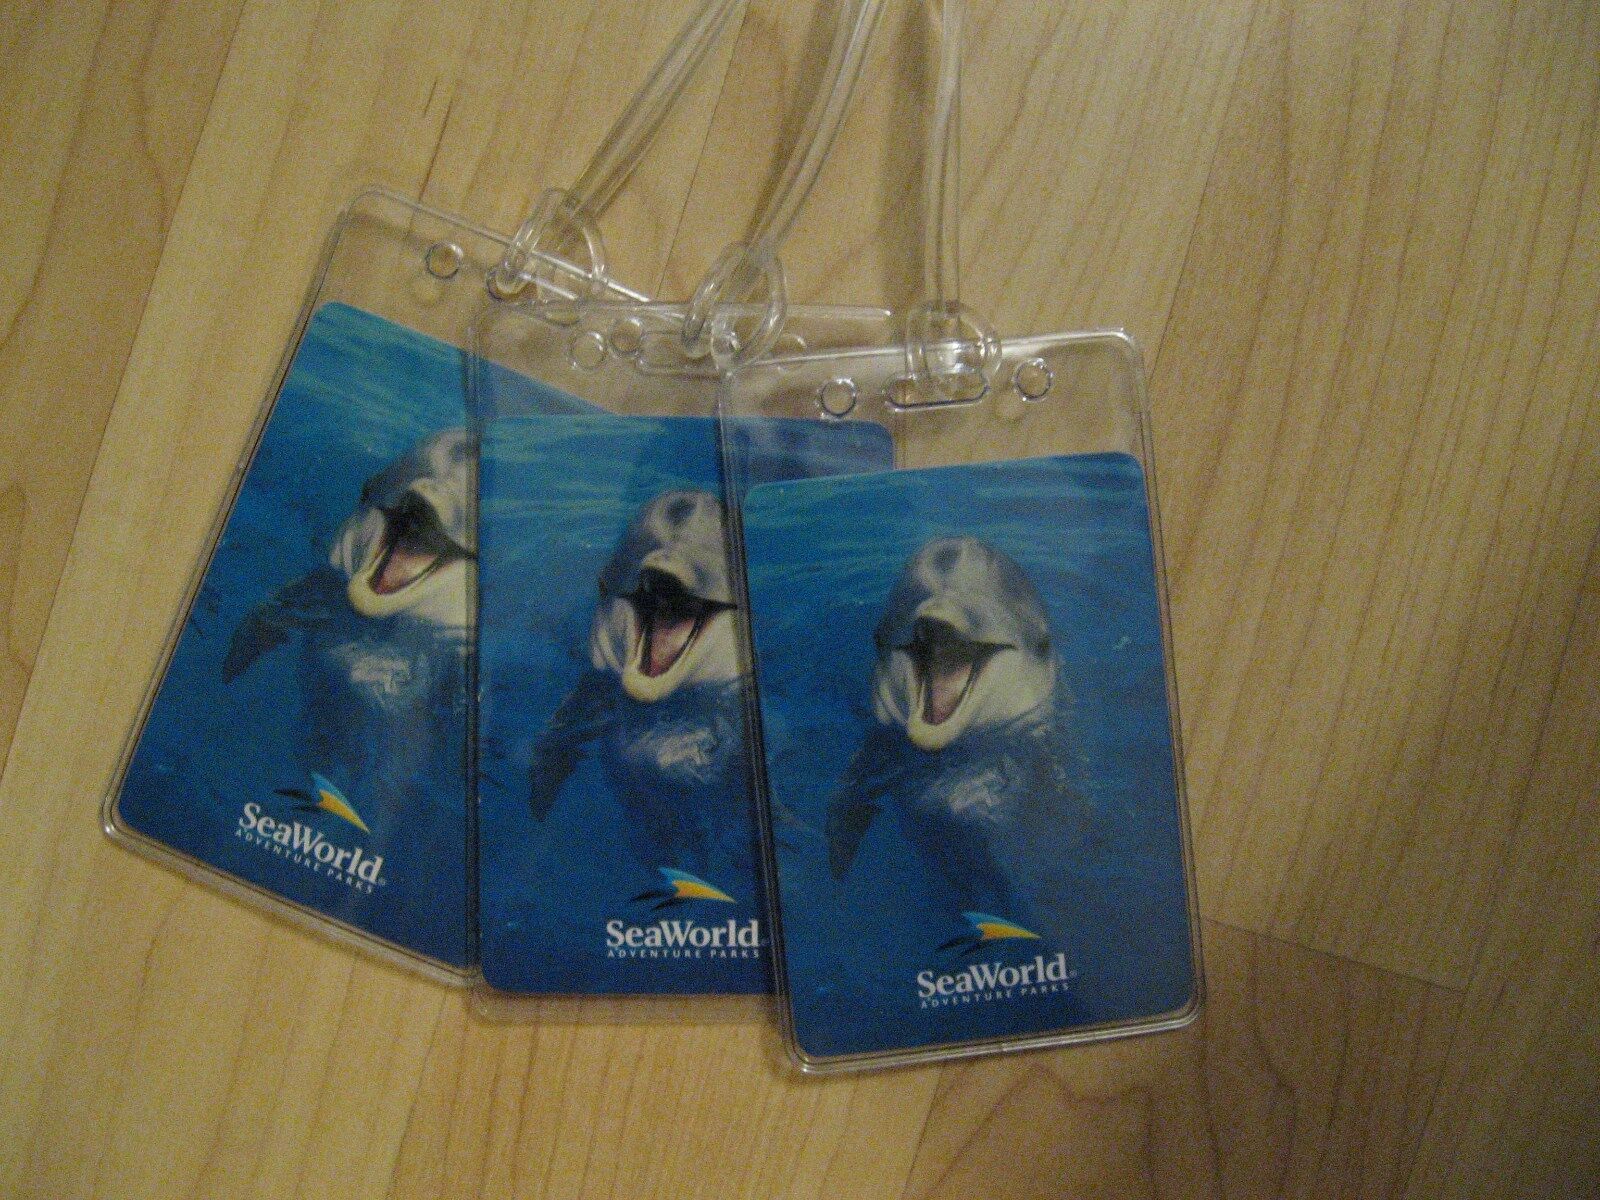 Sea World Dolphin Luggage Tags - Vintage Theme Park Playing Card Name Tag Set 3